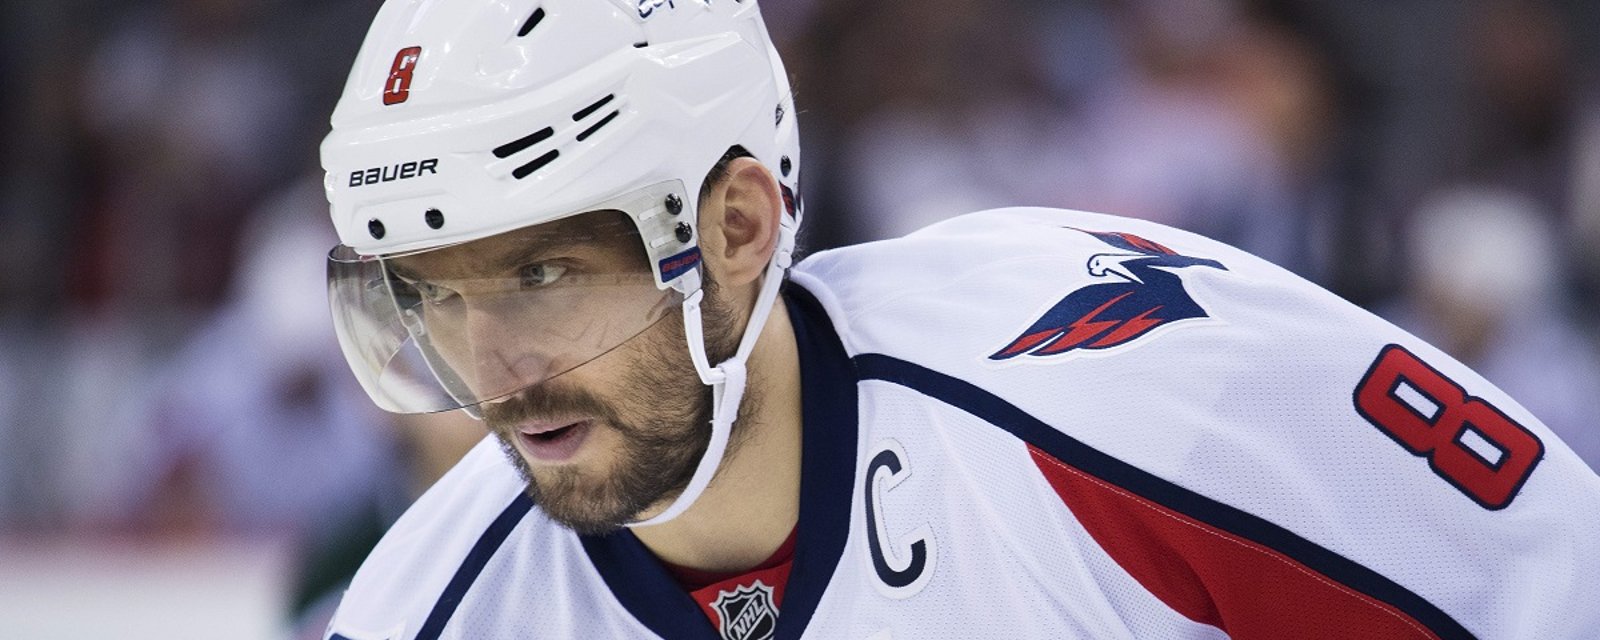 Capitals may be unable to field a full lineup due to salary cap and injury issues.